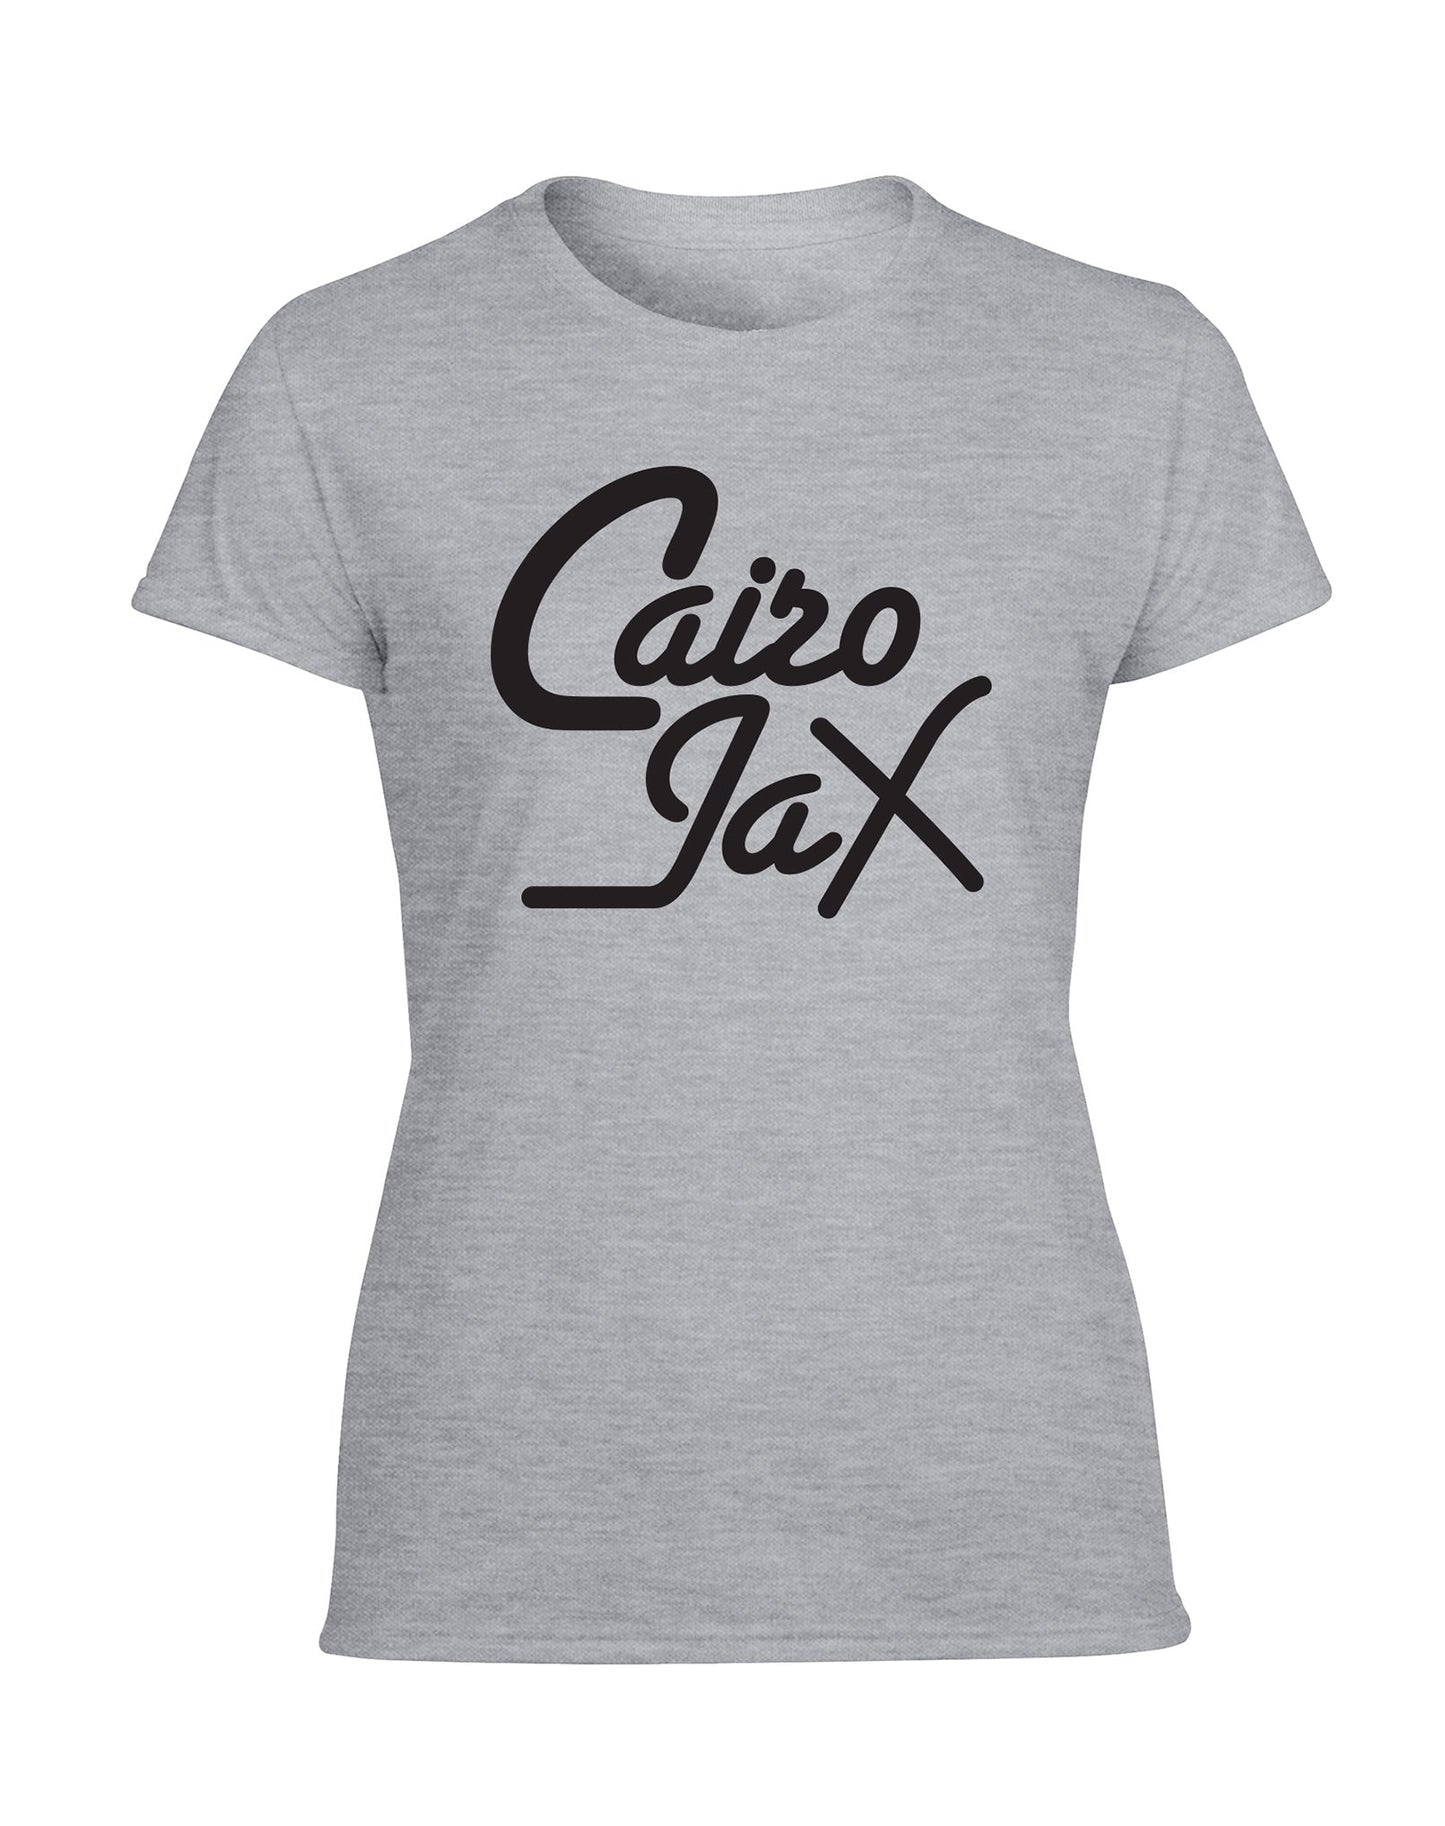 Cairo Jax ladies fit t-shirt- various colours - Dirty Stop Outs